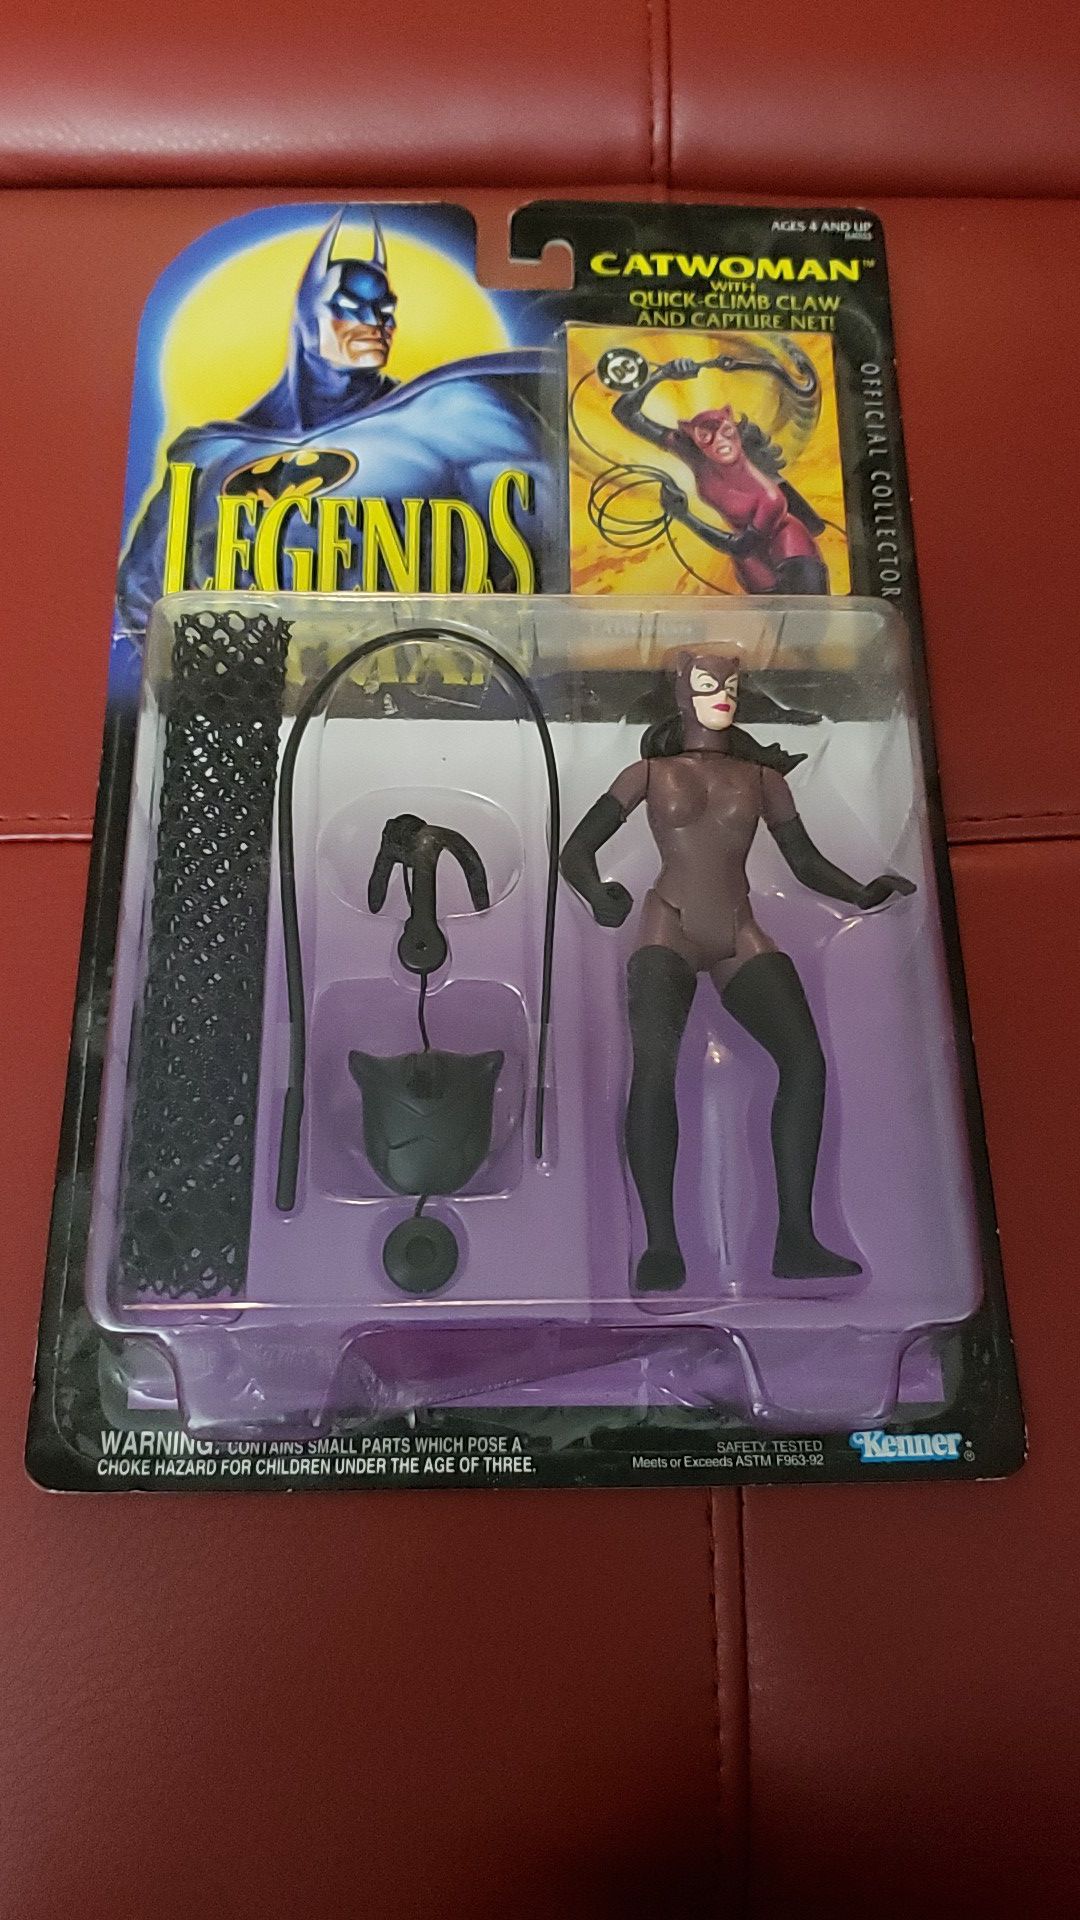 New in Box...Legends of Batman Collectible Catwoman Figure and Toys with Official Collectors Card.